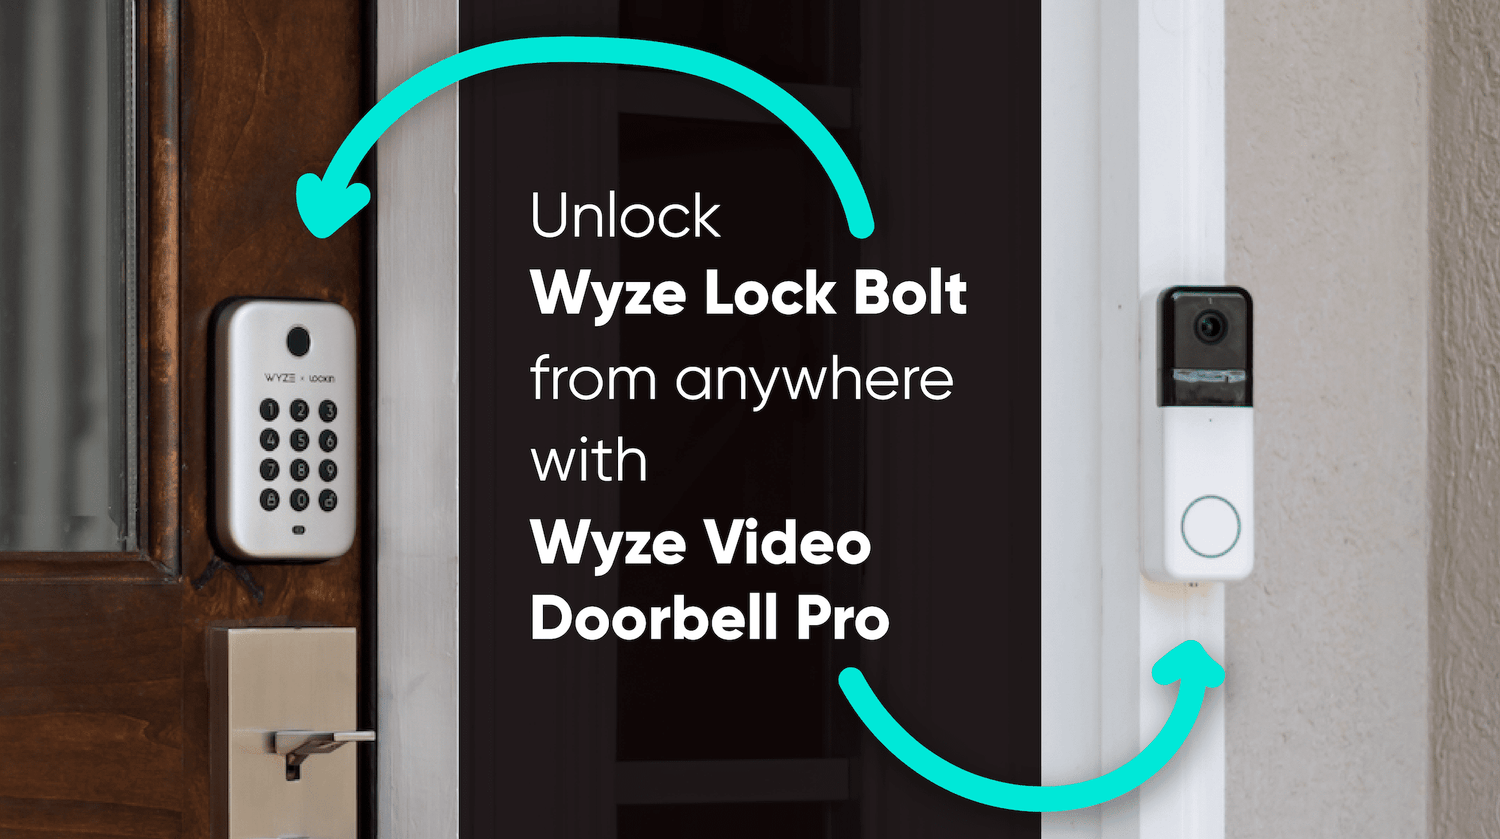 Unlock wyze lock bolt from anywhere with wyze doorbell pro video